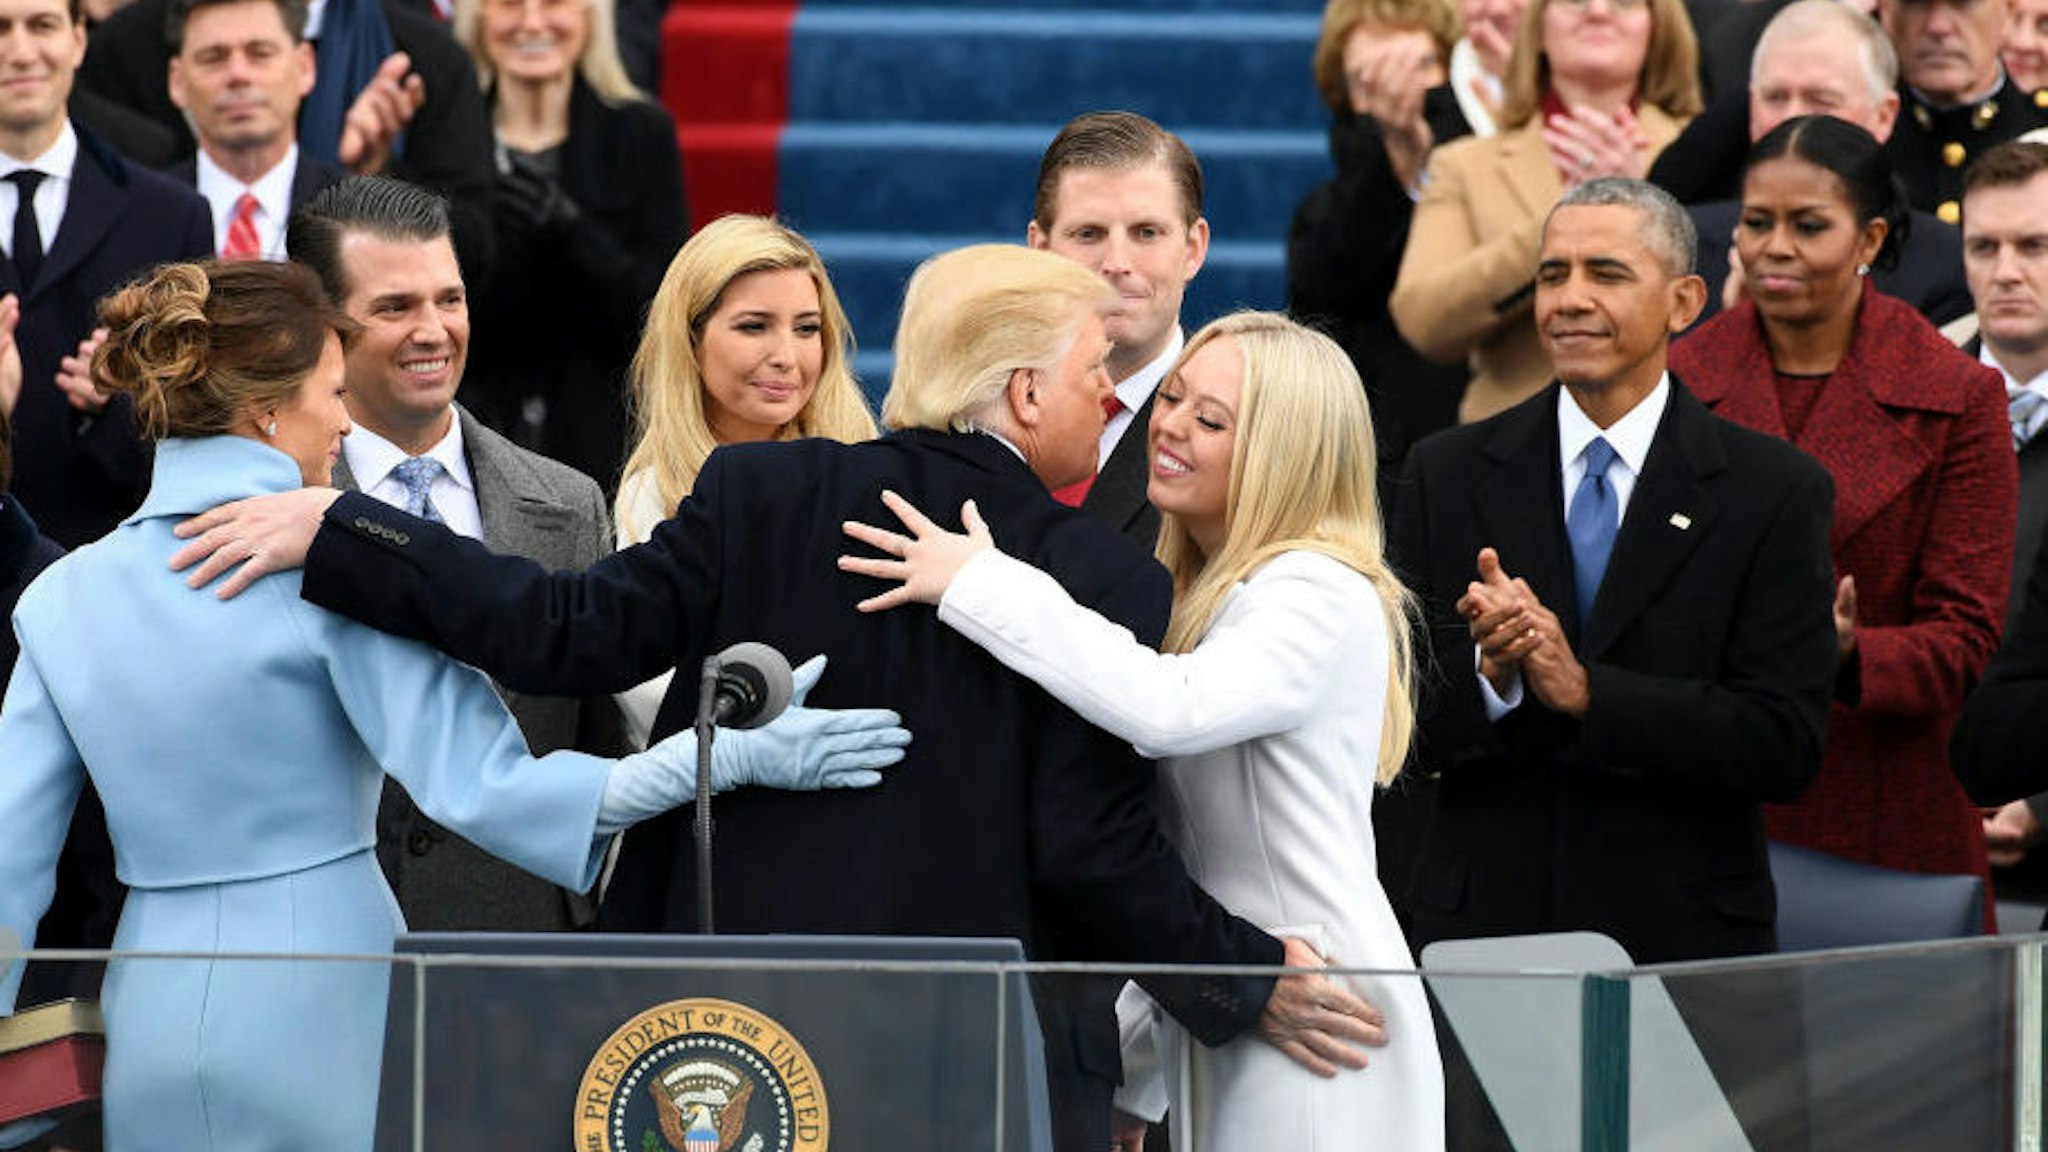 U.S. President Donald Trump embraces his family during the 58th presidential inauguration in Washington, D.C., U.S., on Friday, Jan. 20, 2017. Monday, January 20, 2020, marks the third anniversary of U.S. President Donald Trump's inauguration. Our editors select the best archive images looking back over Trump’s term in office. Photographer: Pat Benic/Pool via Bloomberg